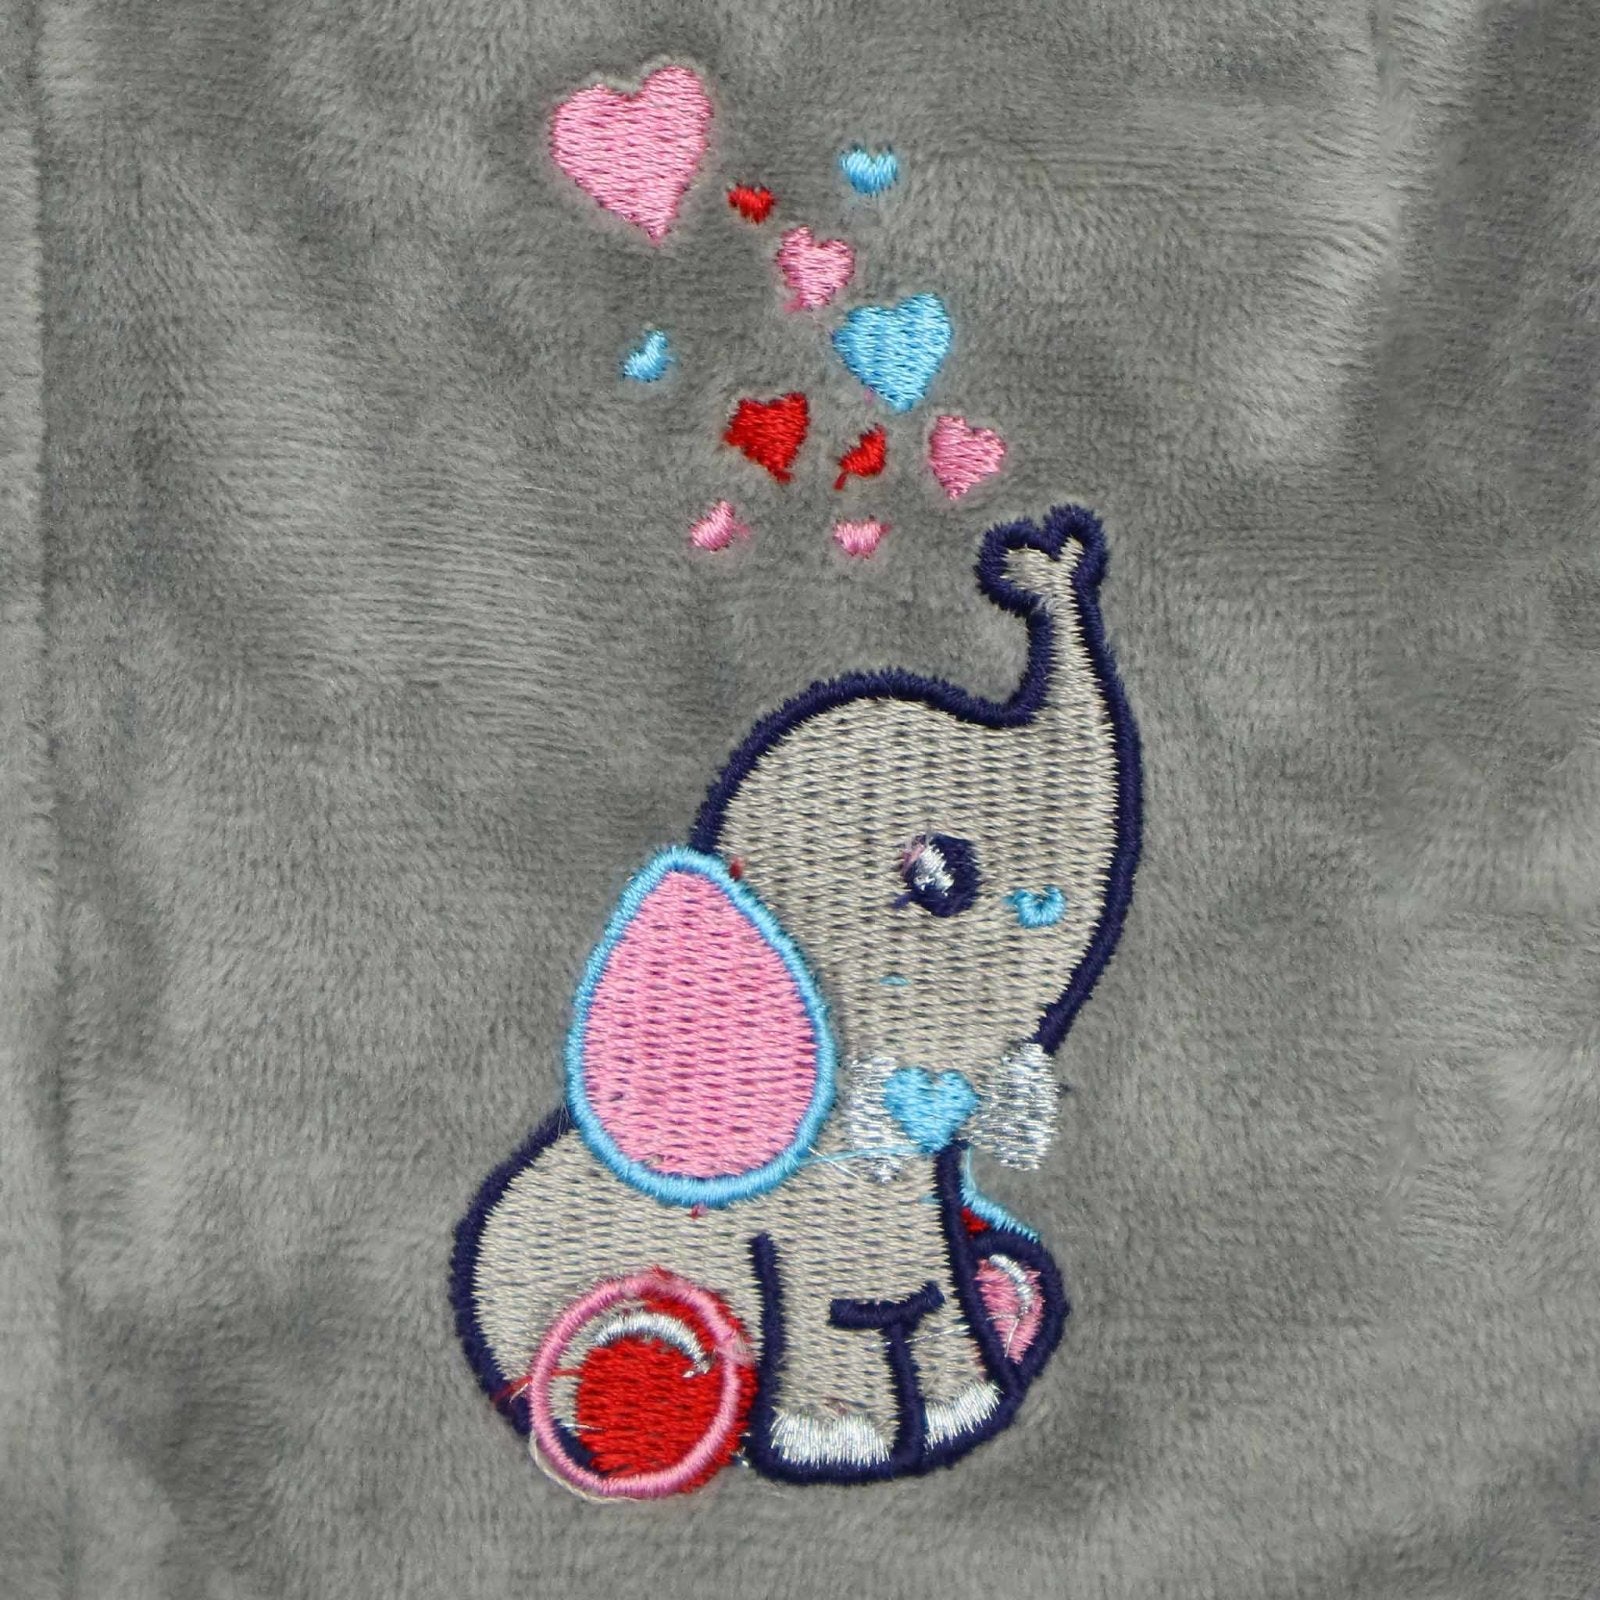 Hooded Jacket Elephant Embroidery by Little Darling